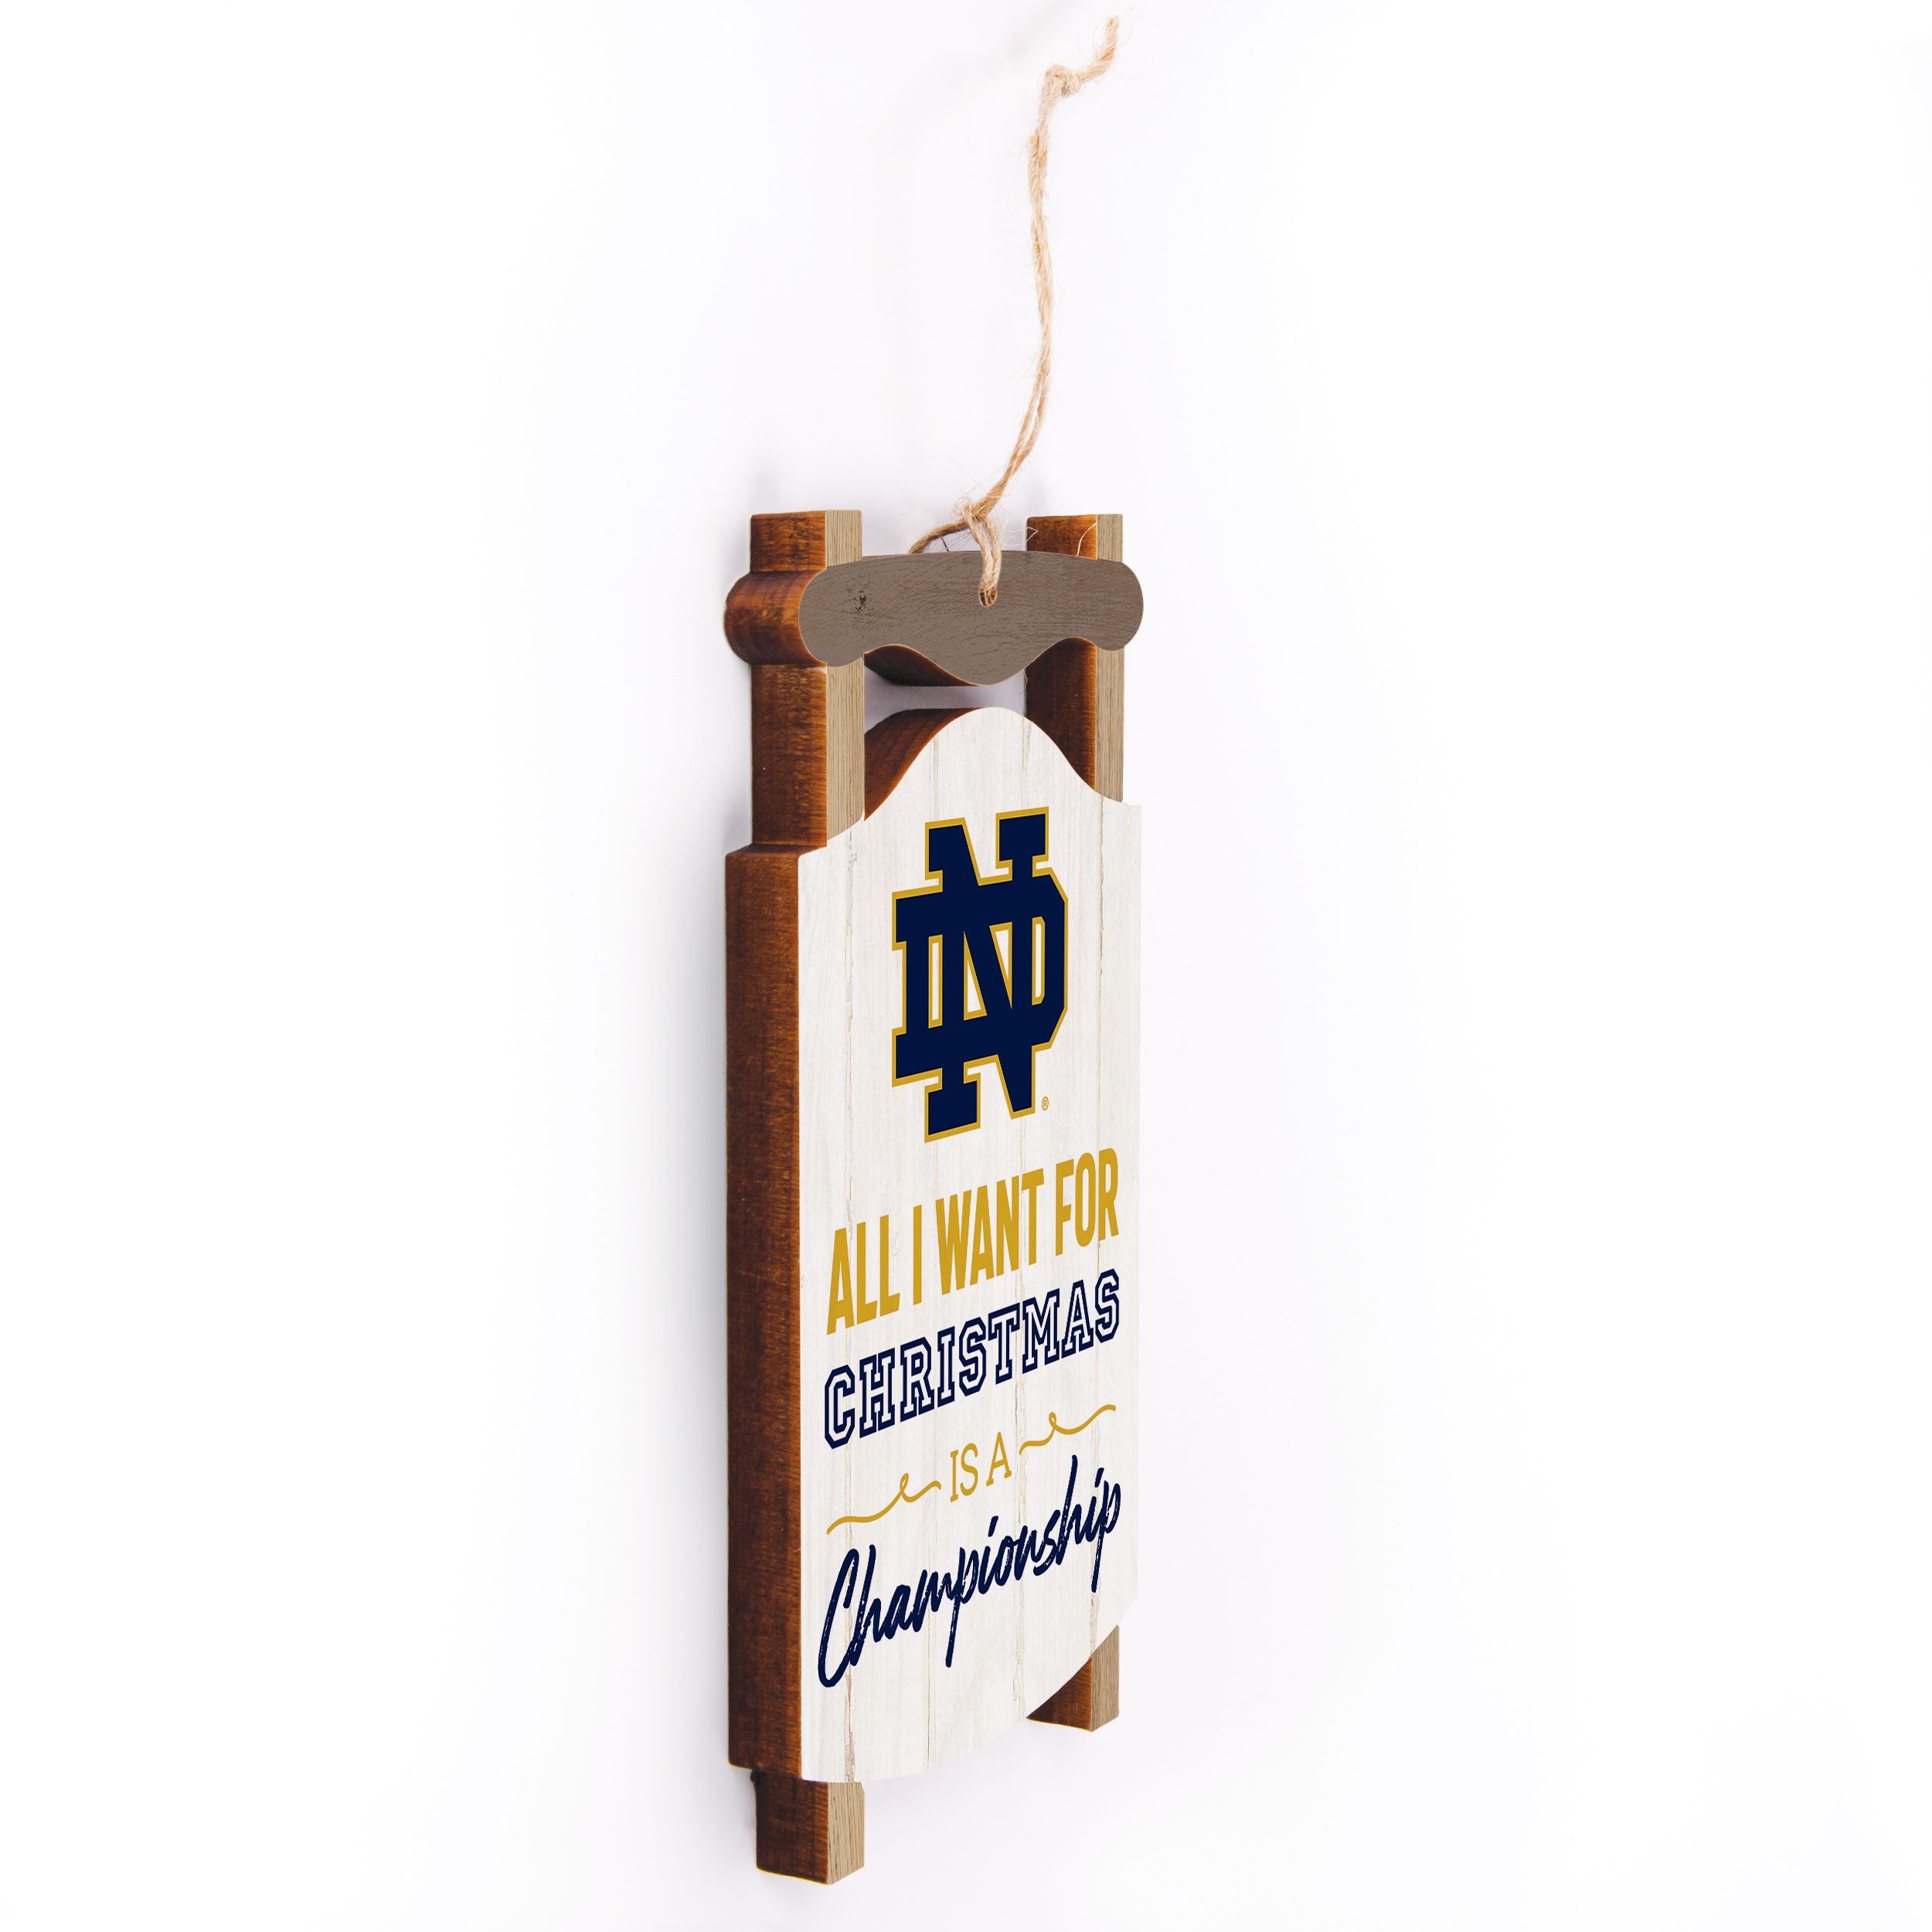 All I Want for Christmas is a Championship - University of Notre Dame Sled Ornament